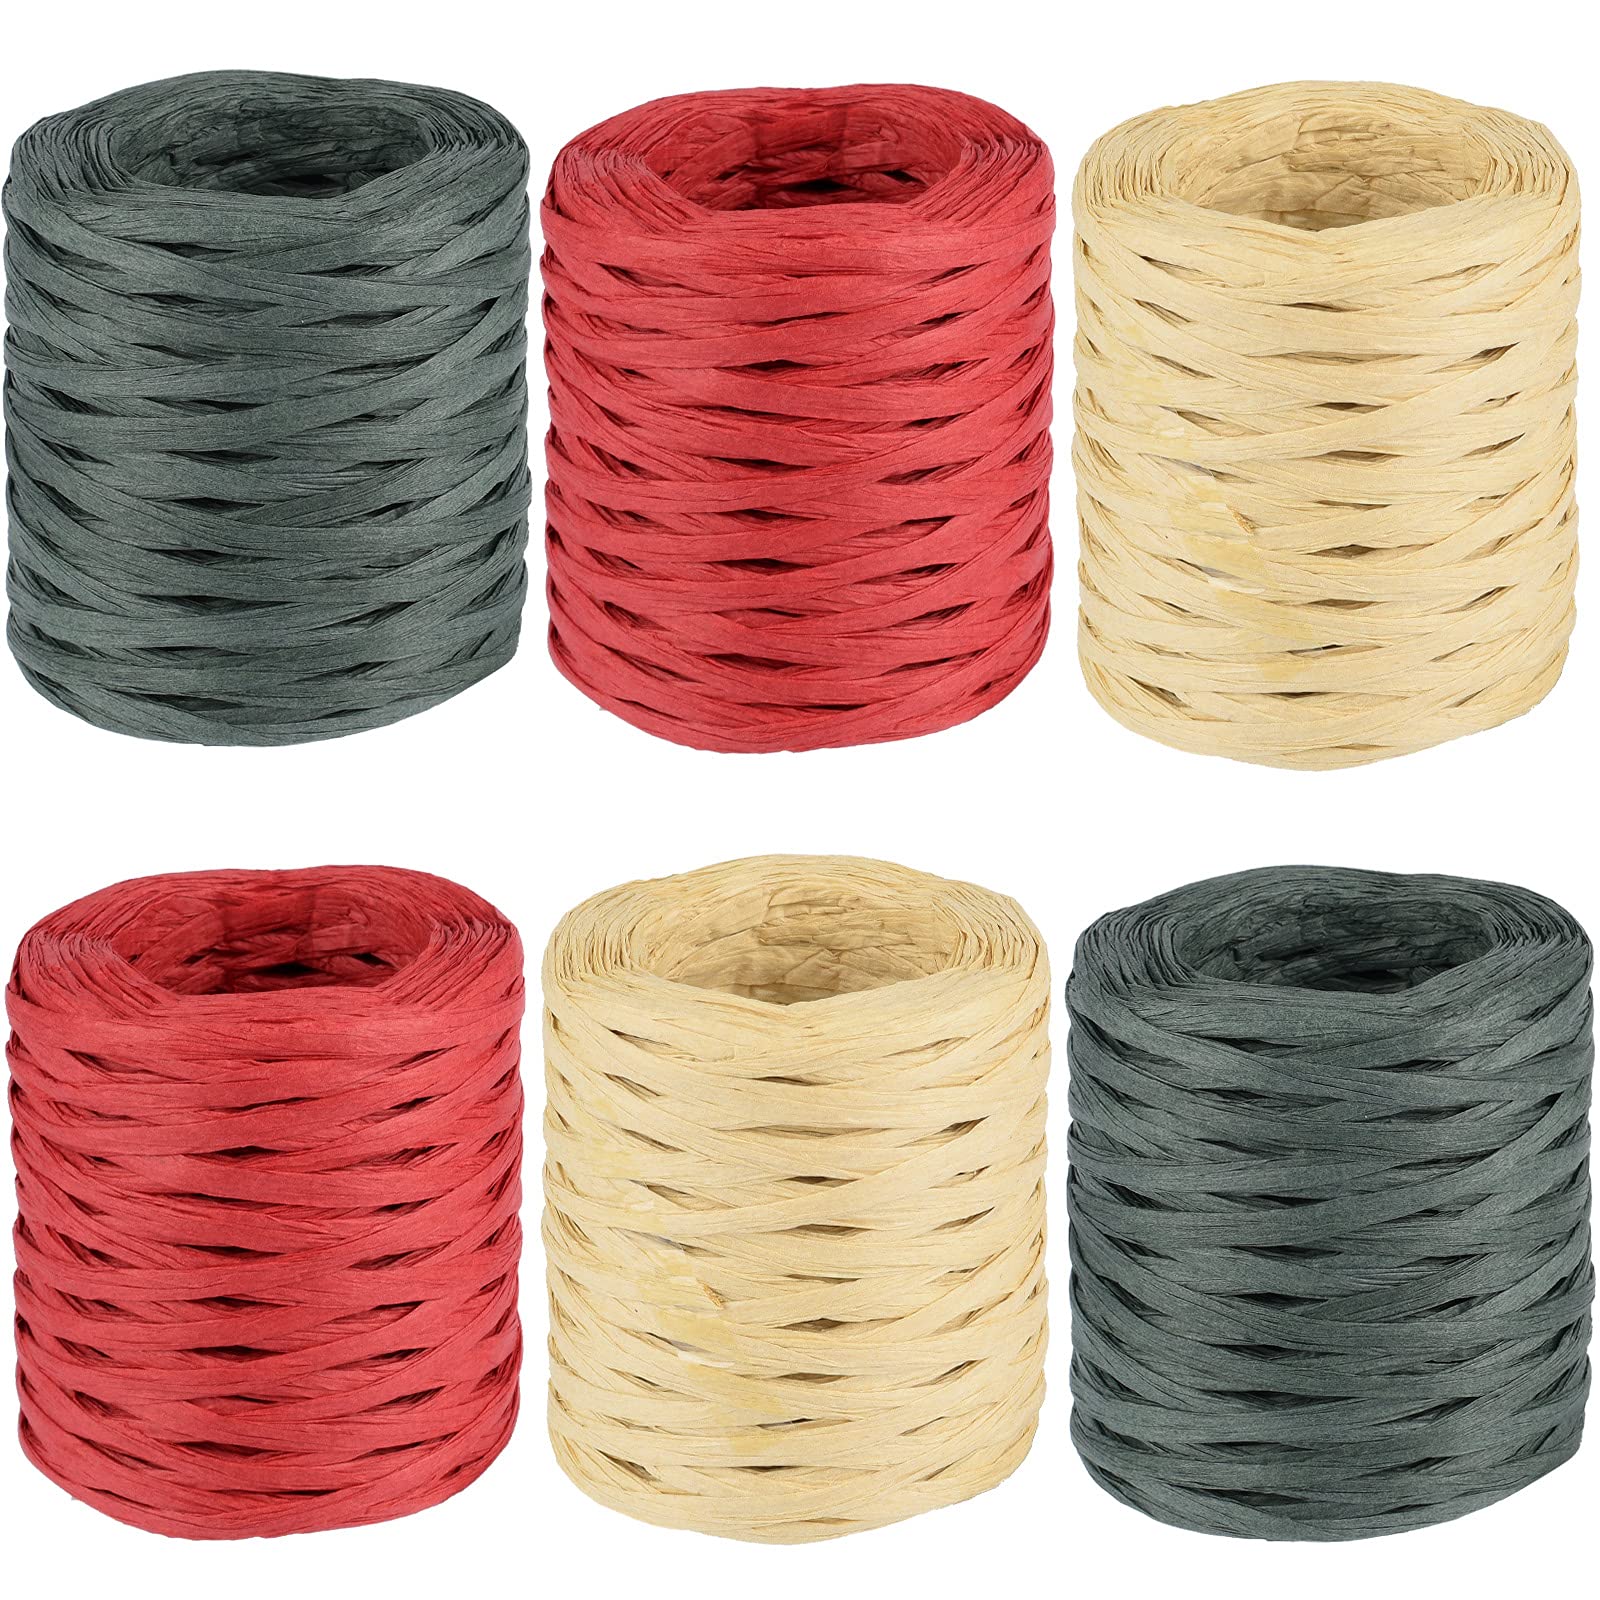 1 Roll Christmas Natural Raffia Paper Ribbon, Matte Twine Raffia Ribbon for Gift Wrapping,1/4 inch Wide,218 Yards, Paper Decorative String for Gift